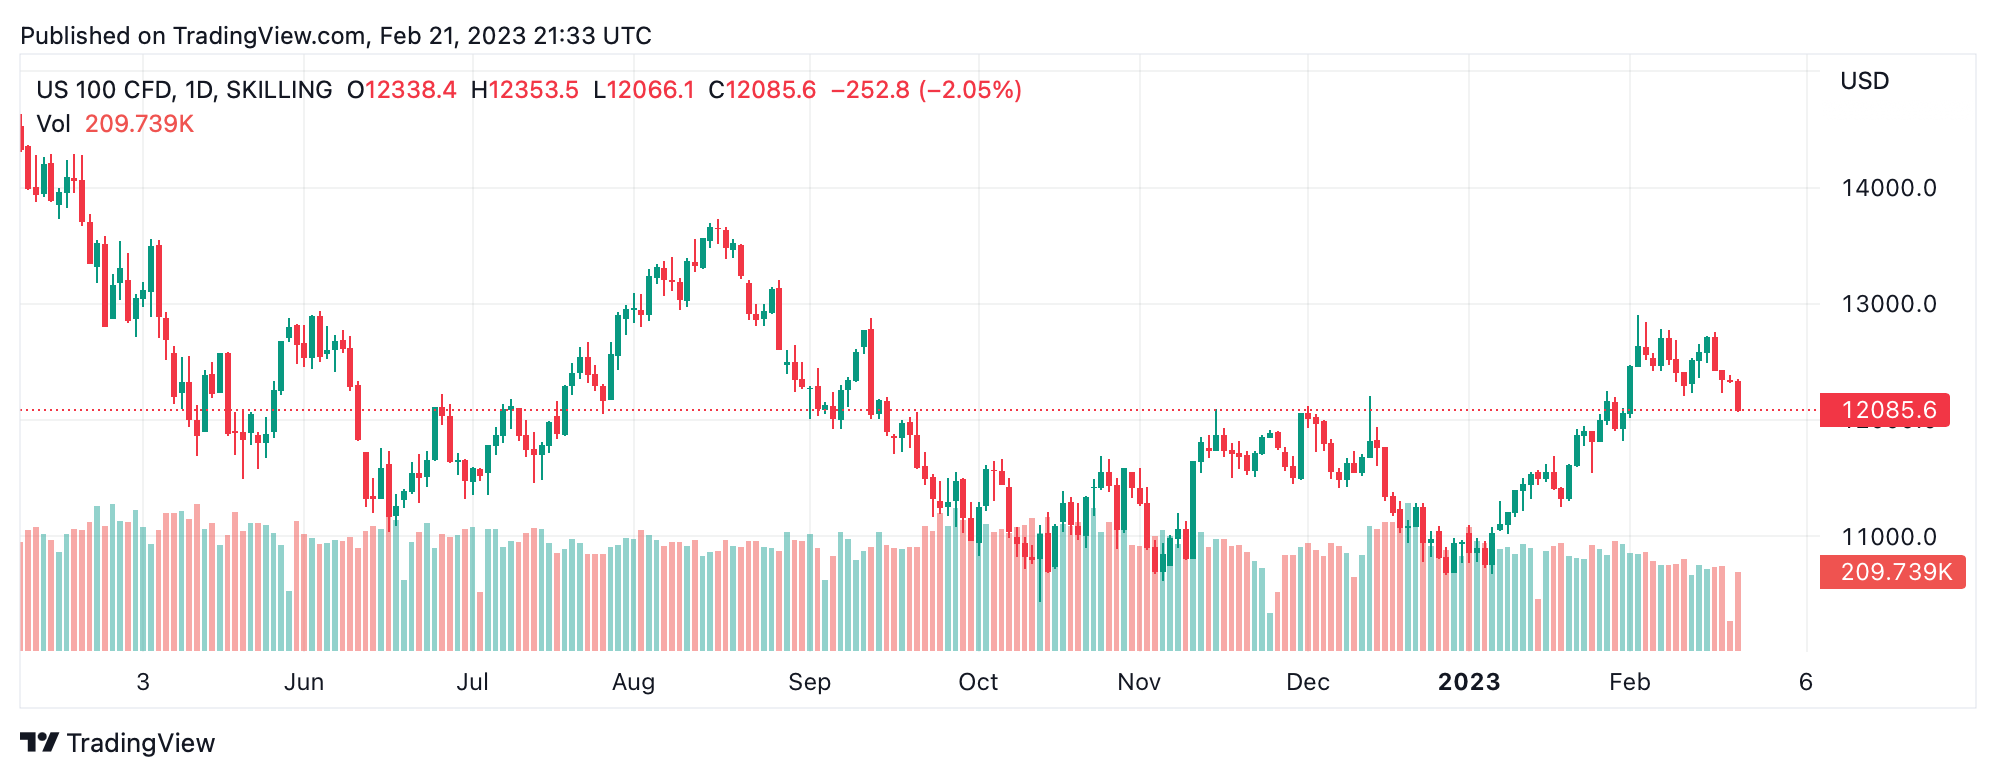 US Markets Tumble as Real Estate Weakens, Putin Suspends Nuclear Treaty, Morgan Stanley Warns of Stock Market 'Death Zone'